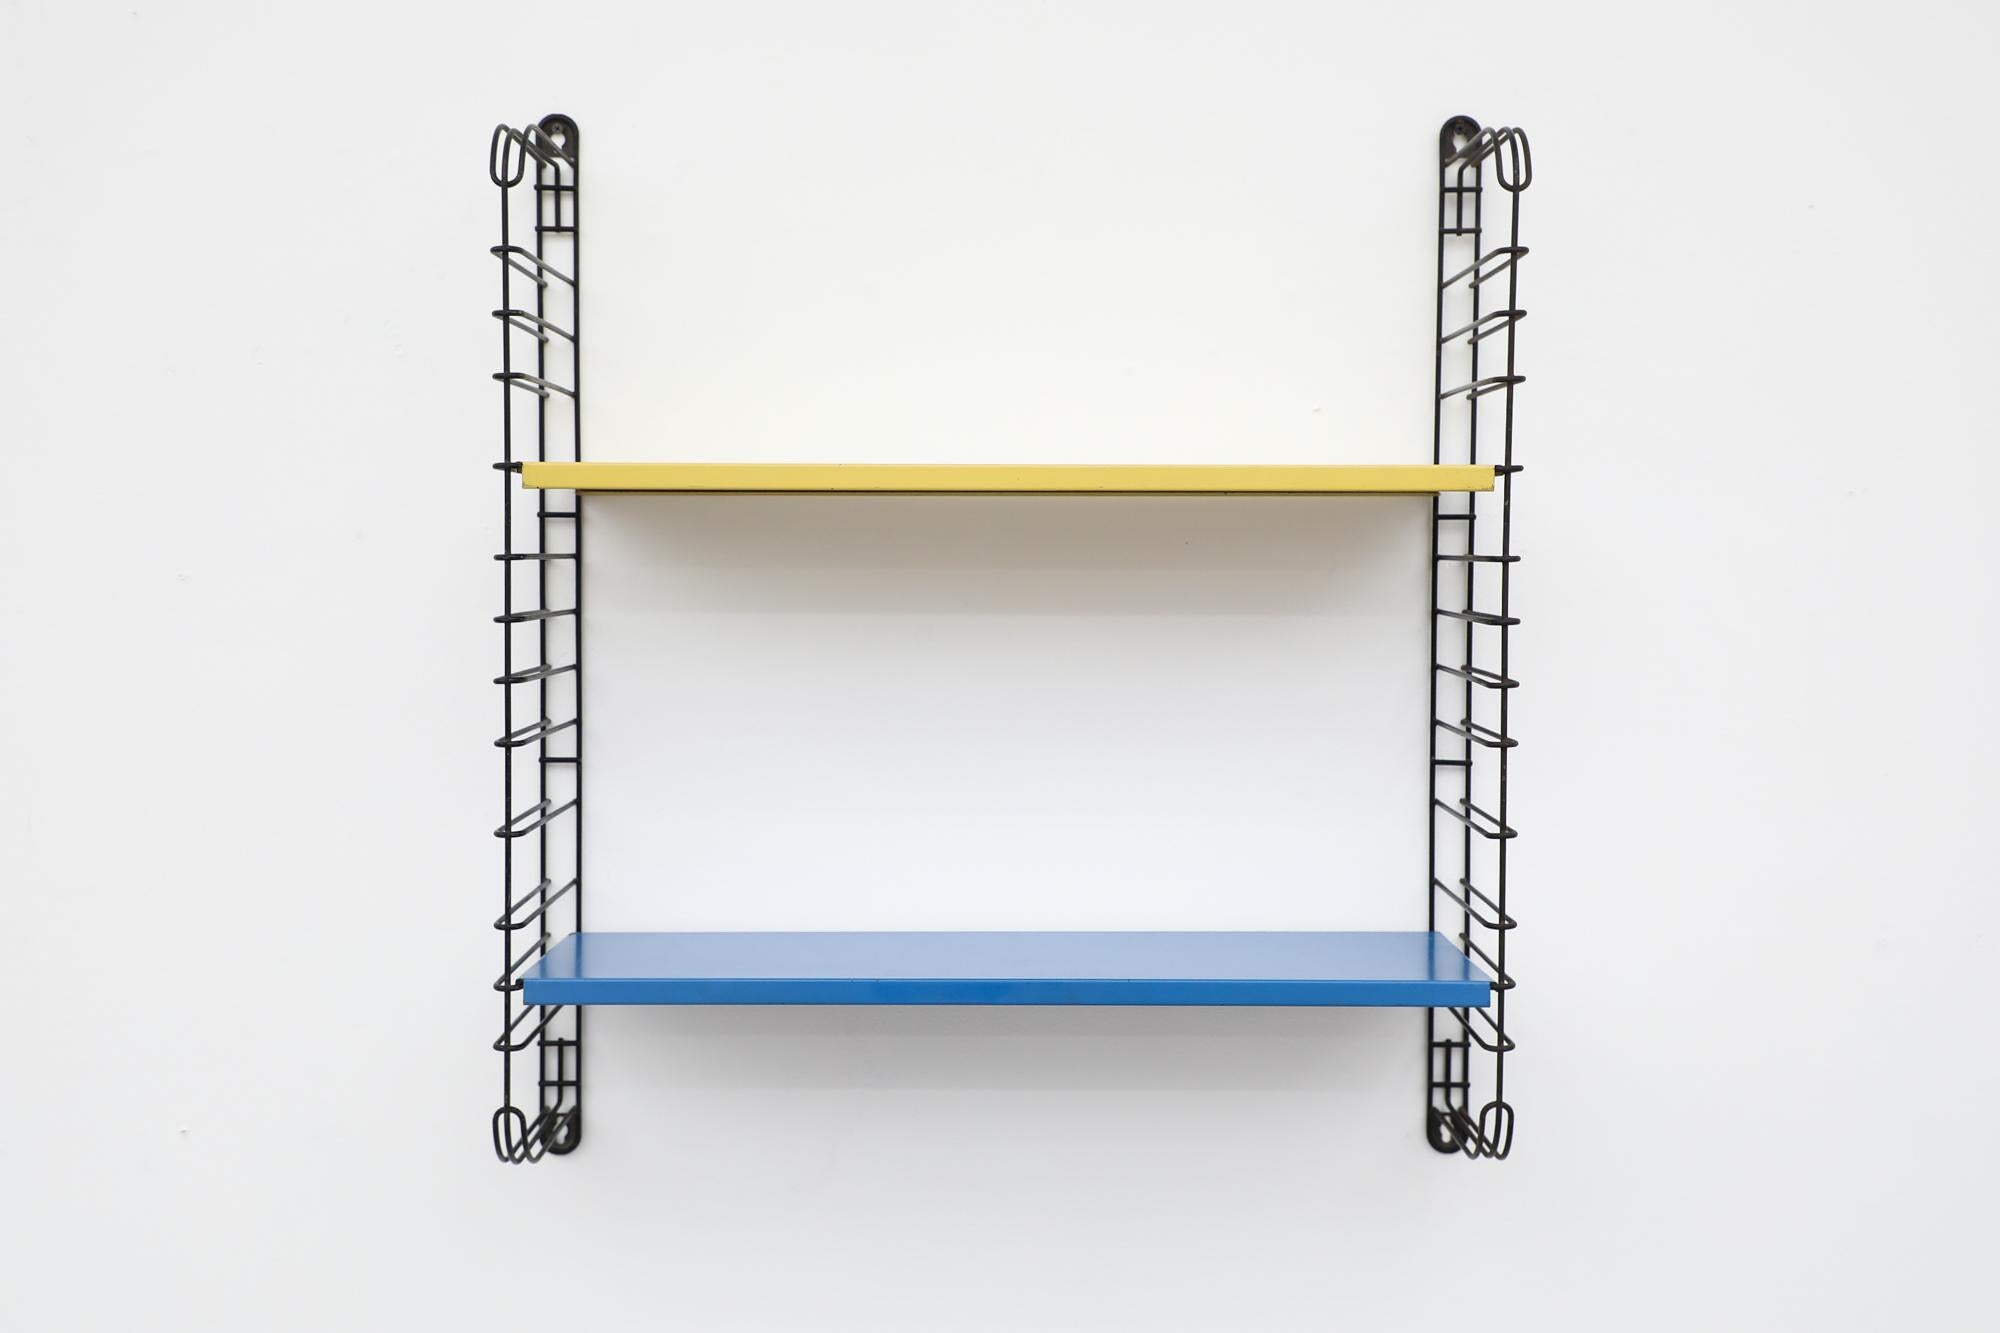 Midcentury TOMADO industrial shelving with yellow and blue shelves on black enameled metal wire risers. Designed by Jan van der Togt. The shelves rest on the wire risers and can be arranged to different positions. In original condition with visible